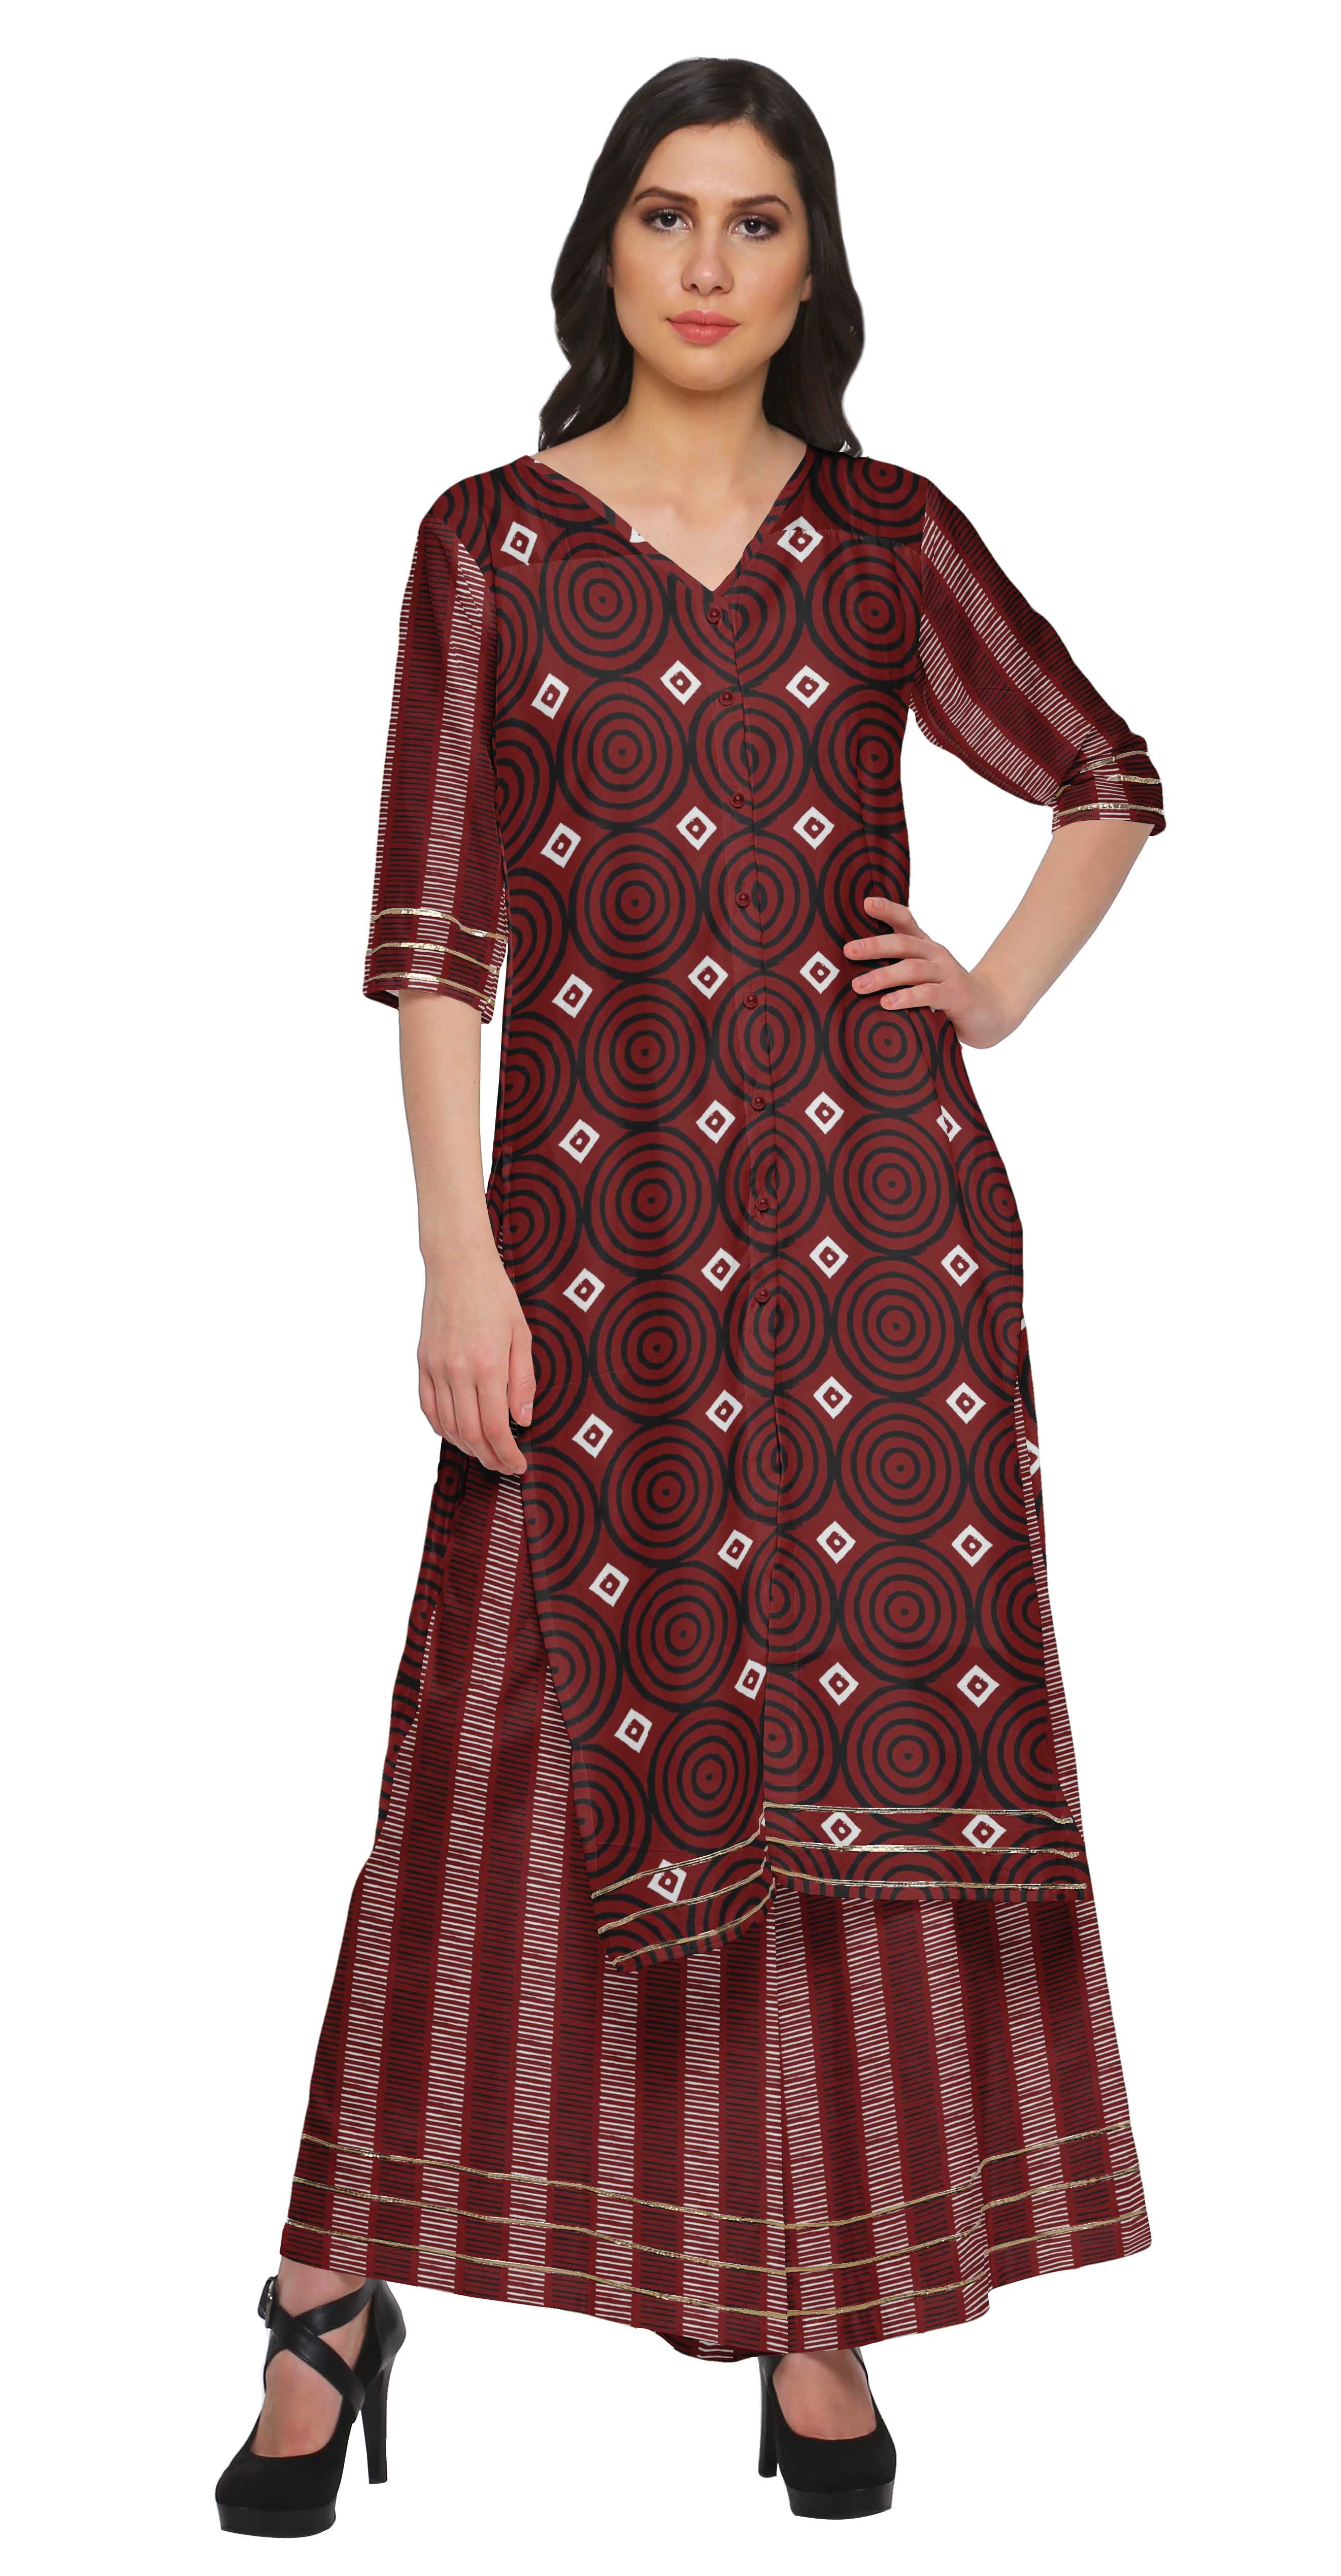 Indian Bollywood Women's Cotton Printed Straight Kurti Palazzo Pants Set  With Dupatta Kurti for Women Special for Festival/partywear - Etsy